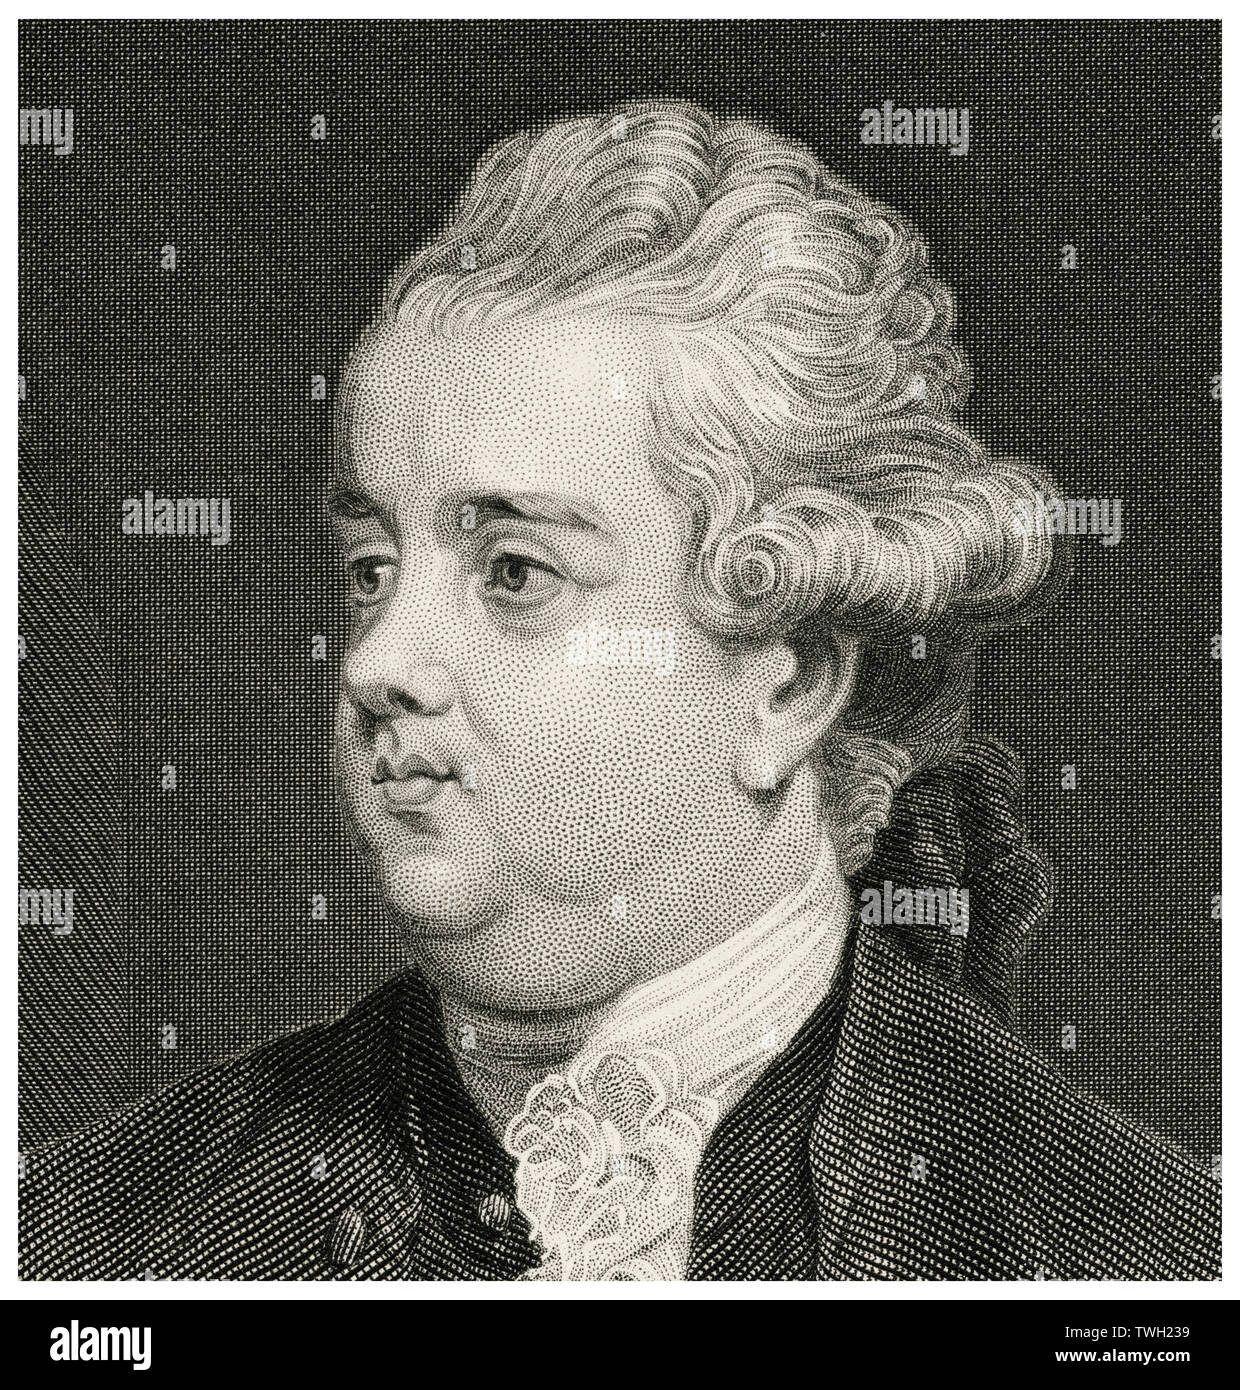 Edward Gibbon (1737-94), English Historian, Writer and Member of Parliament, Head and Shoulders Portrait, Steel Engraving, Portrait Gallery of Eminent Men and Women of Europe and America by Evert A. Duyckinck, Published by Henry J. Johnson, Johnson, Wilson & Company, New York, 1873 Stock Photo